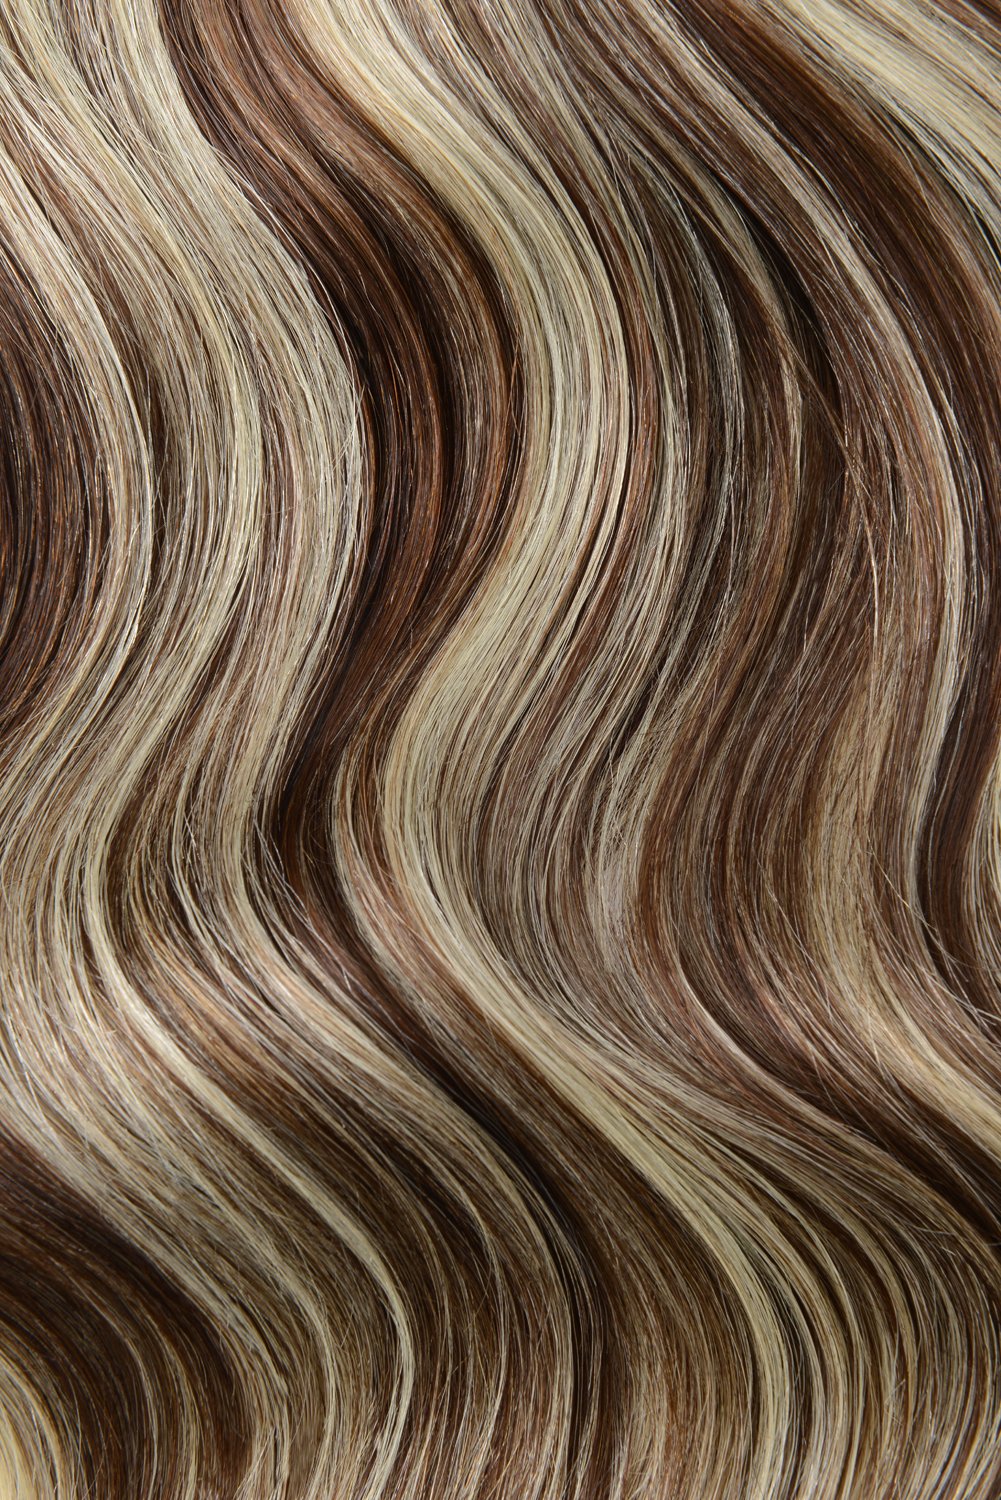 Double Wefted Full Head Remy Clip in Human Hair Extensions - Cookies & Cream (#4/613)